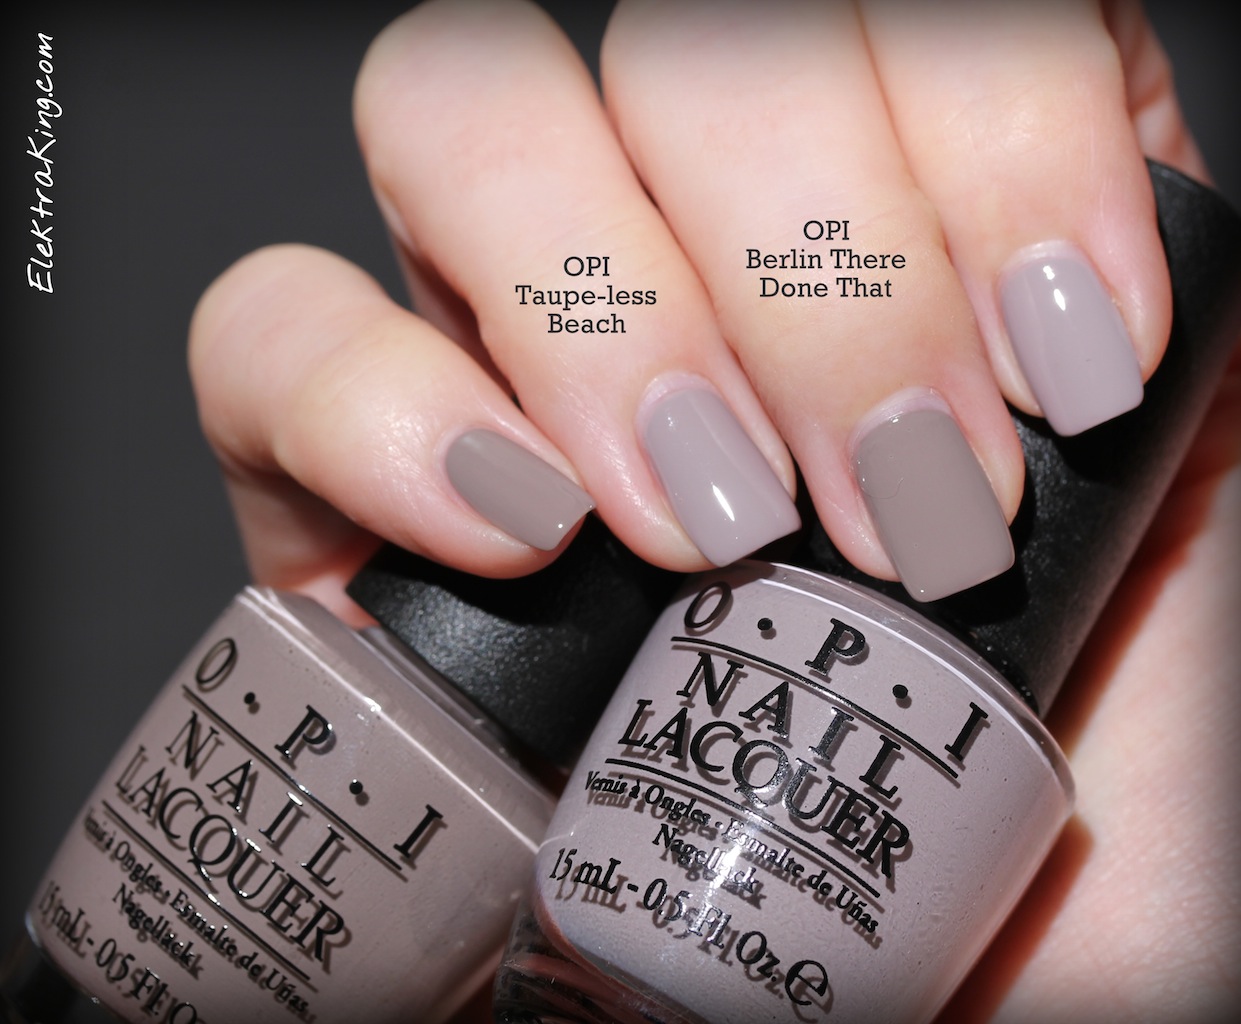 OPI Taupe-less Beach vs OPI Berlin There Done That